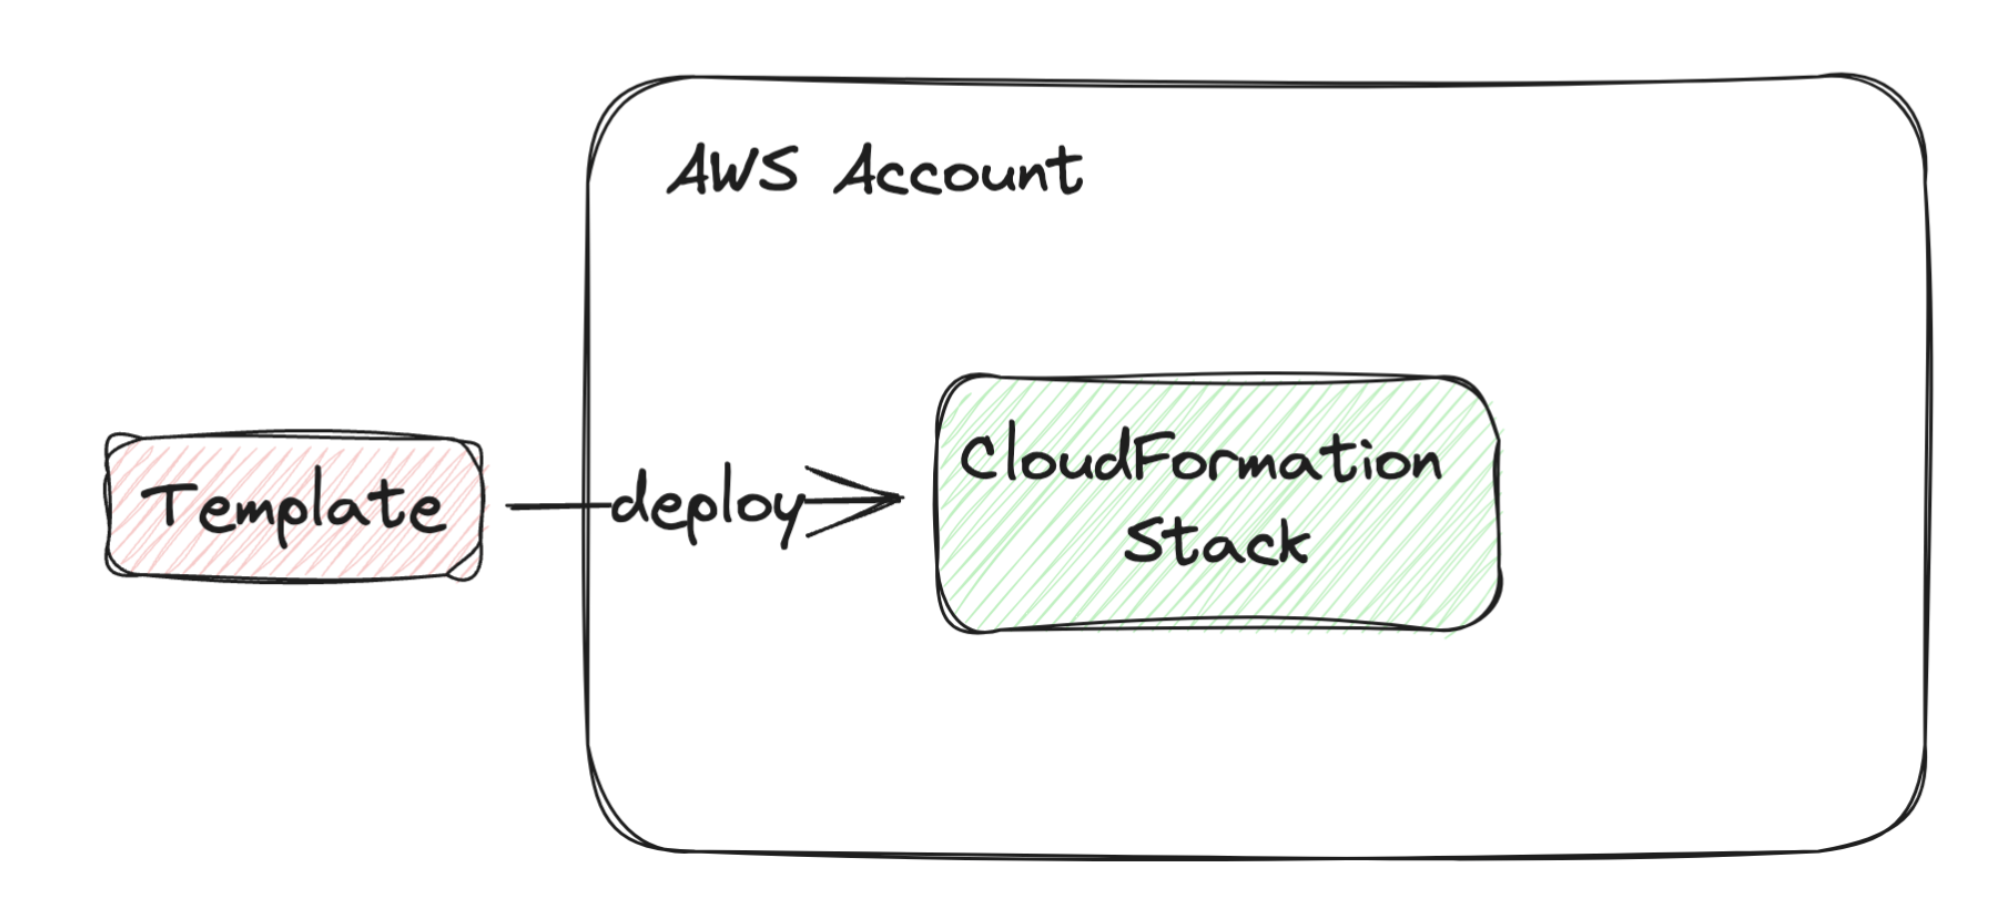 A simple CloudFormation stack